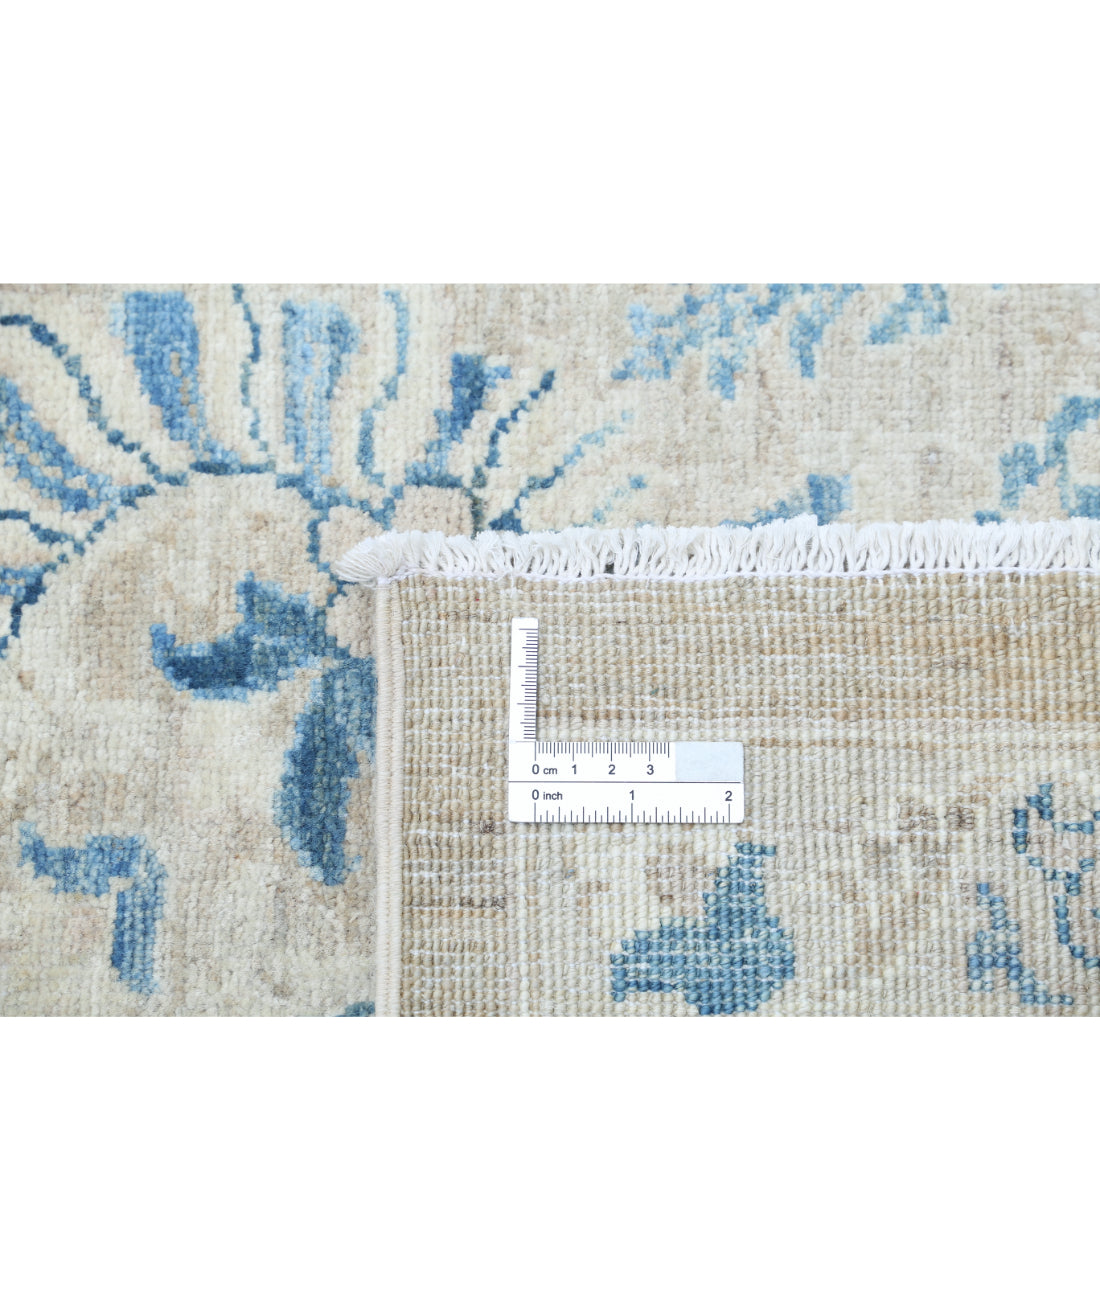 Hand Knotted Serenity Wool Rug - 8'10'' x 11'10'' 8'10'' x 11'10'' (265 X 355) / Taupe / Ivory